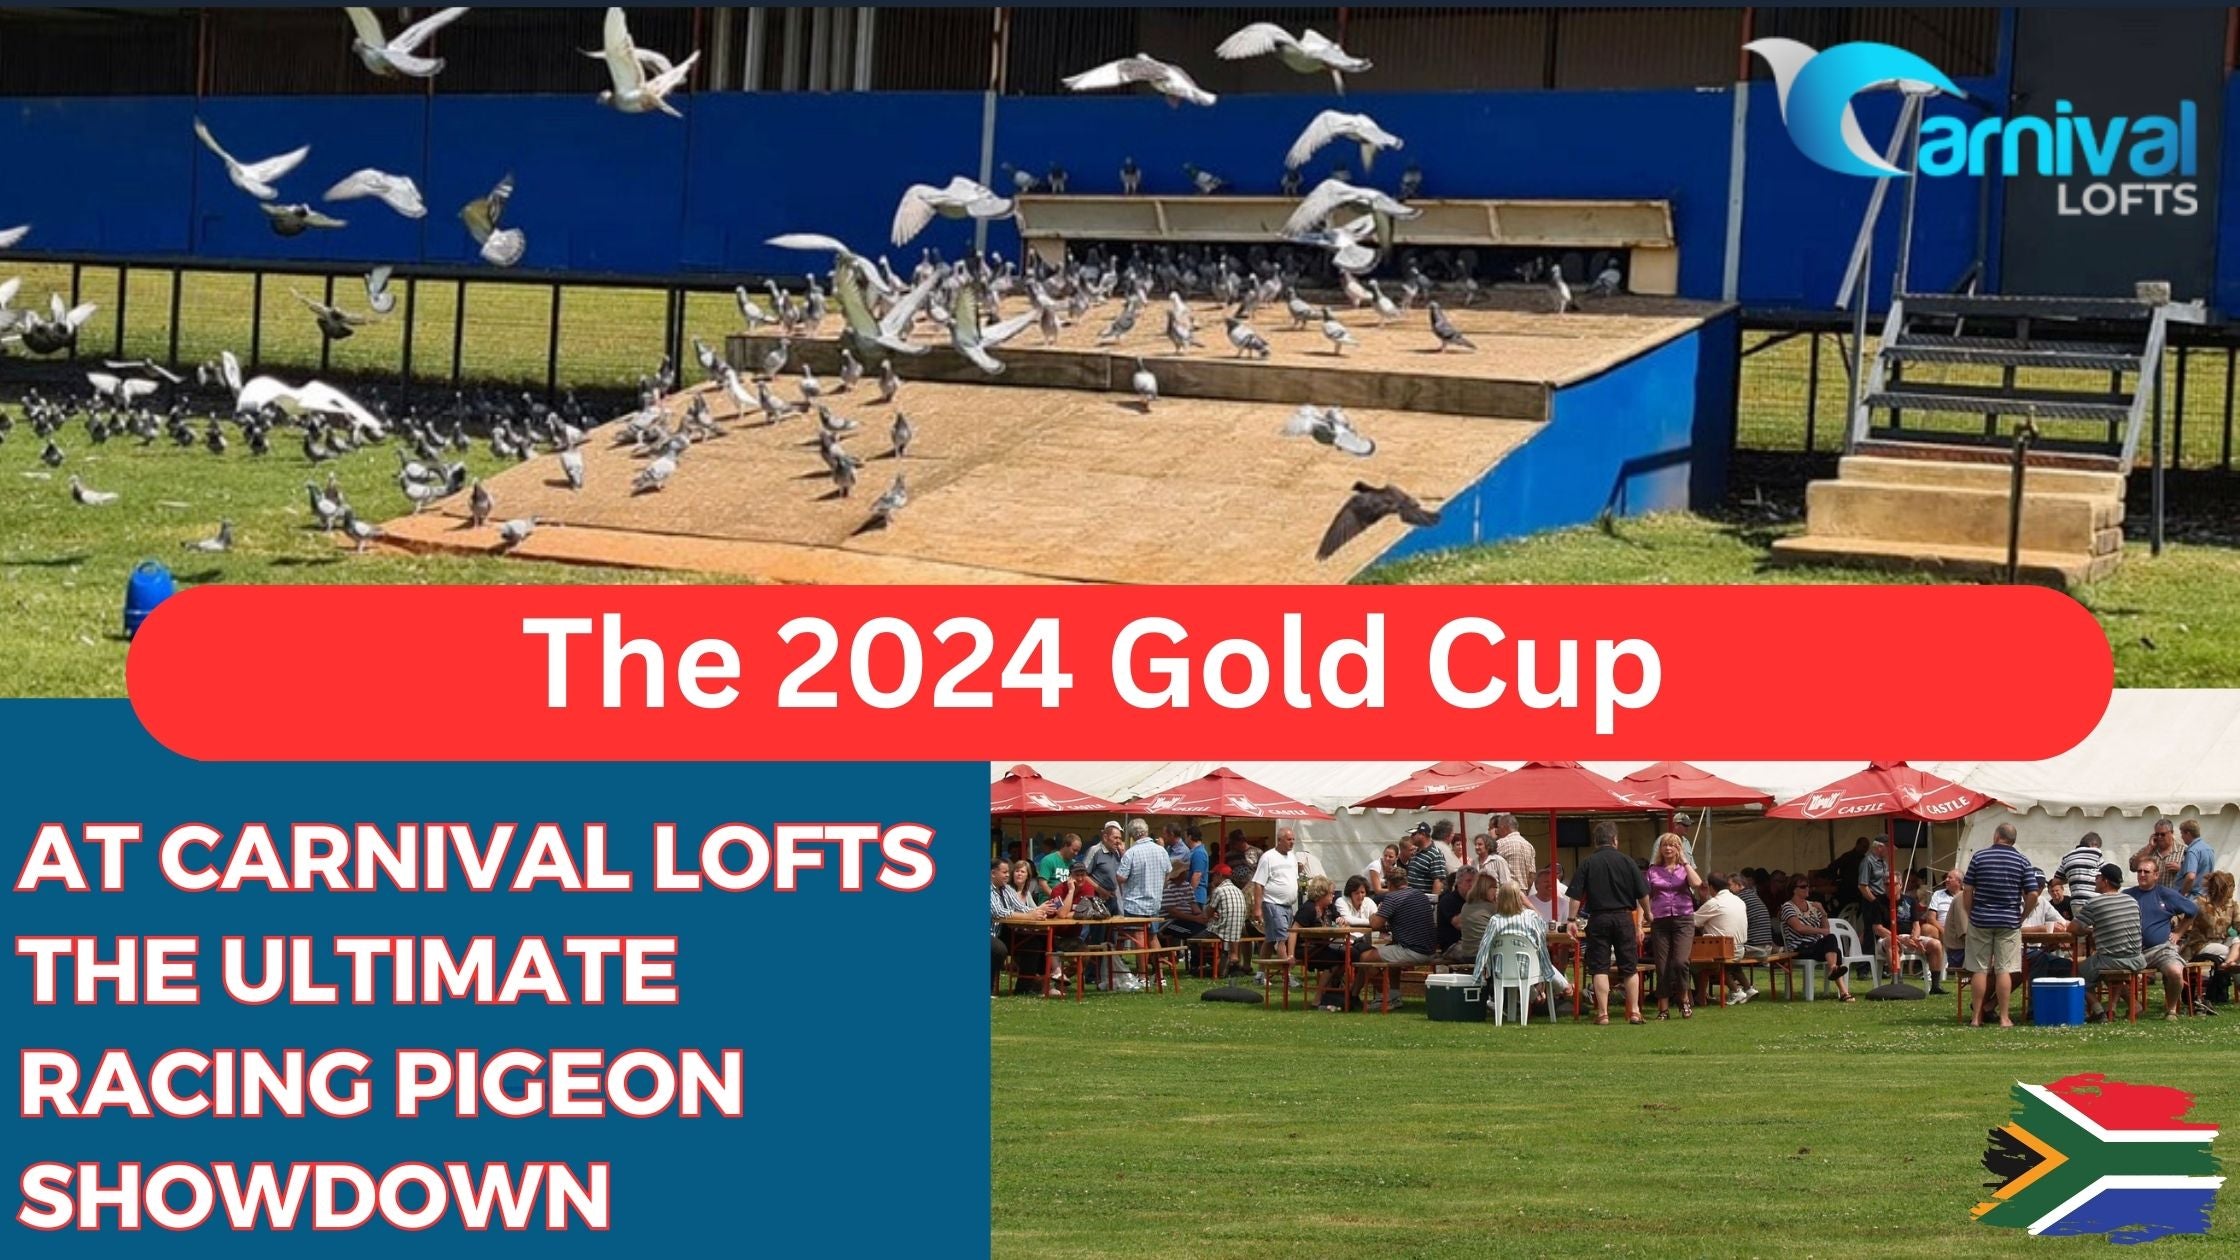 The 2024 Gold Cup at Carnival Lofts – The Ultimate Racing Pigeon Showdown